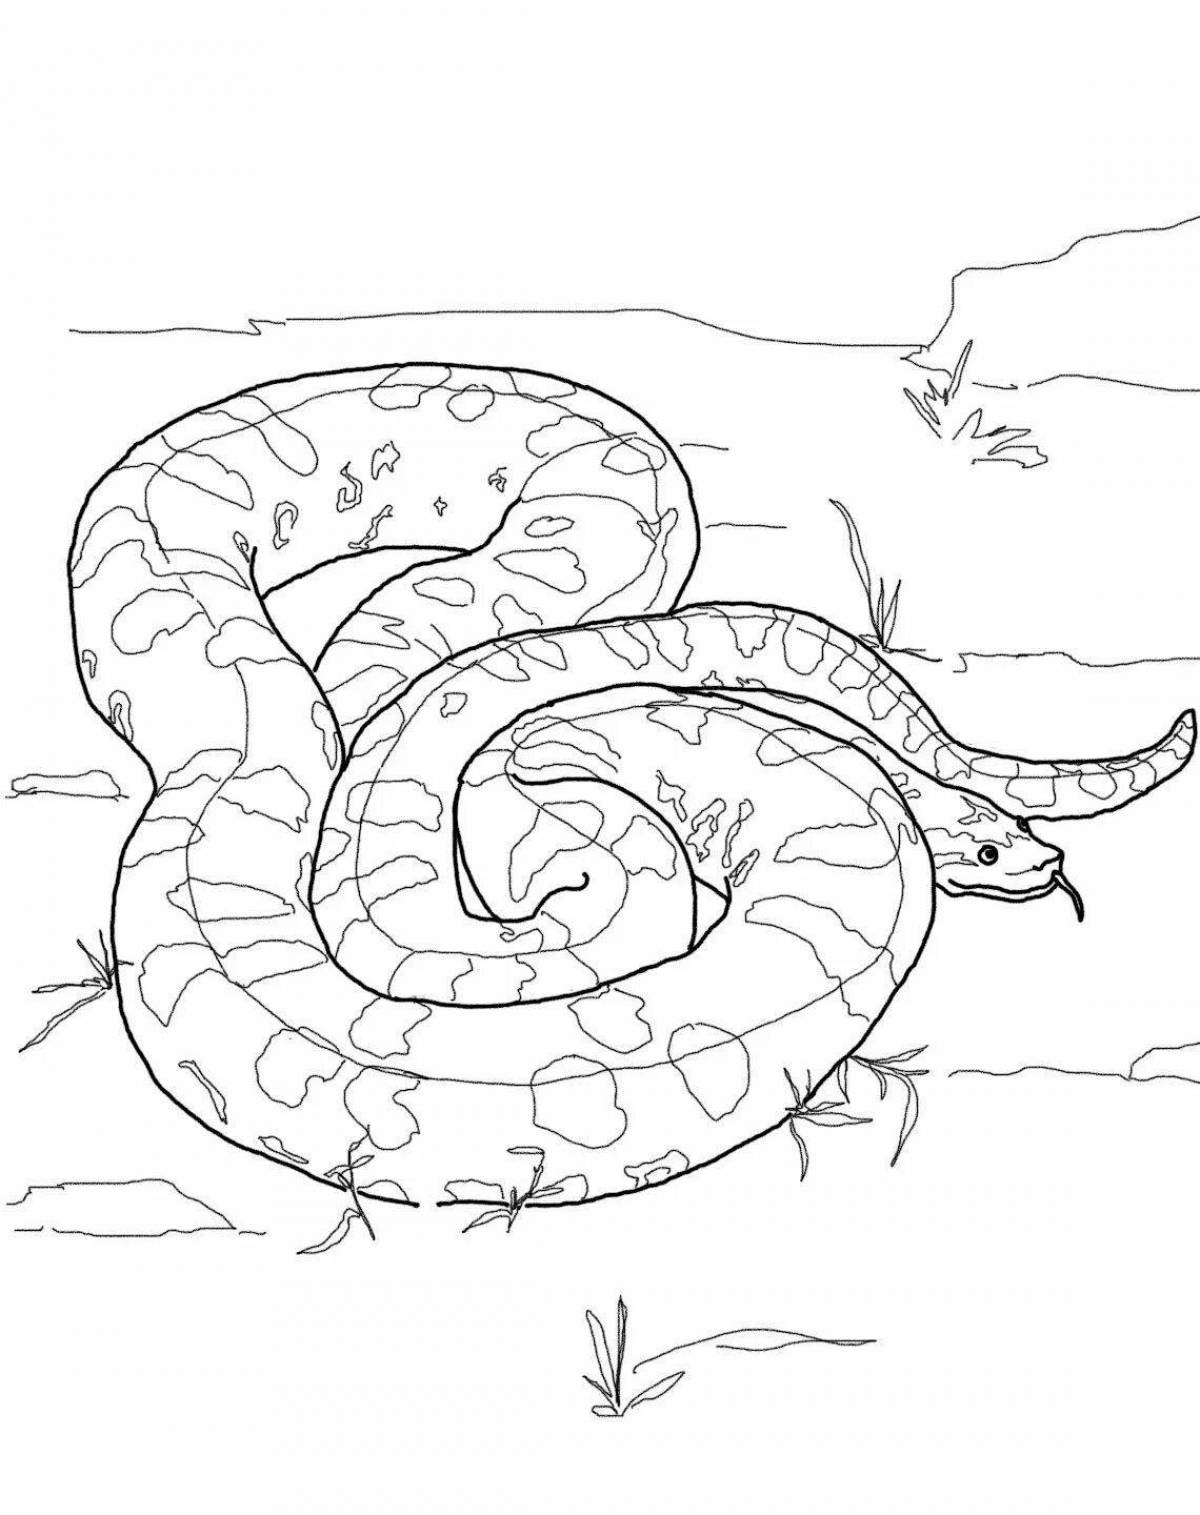 Exquisite blue snake coloring page